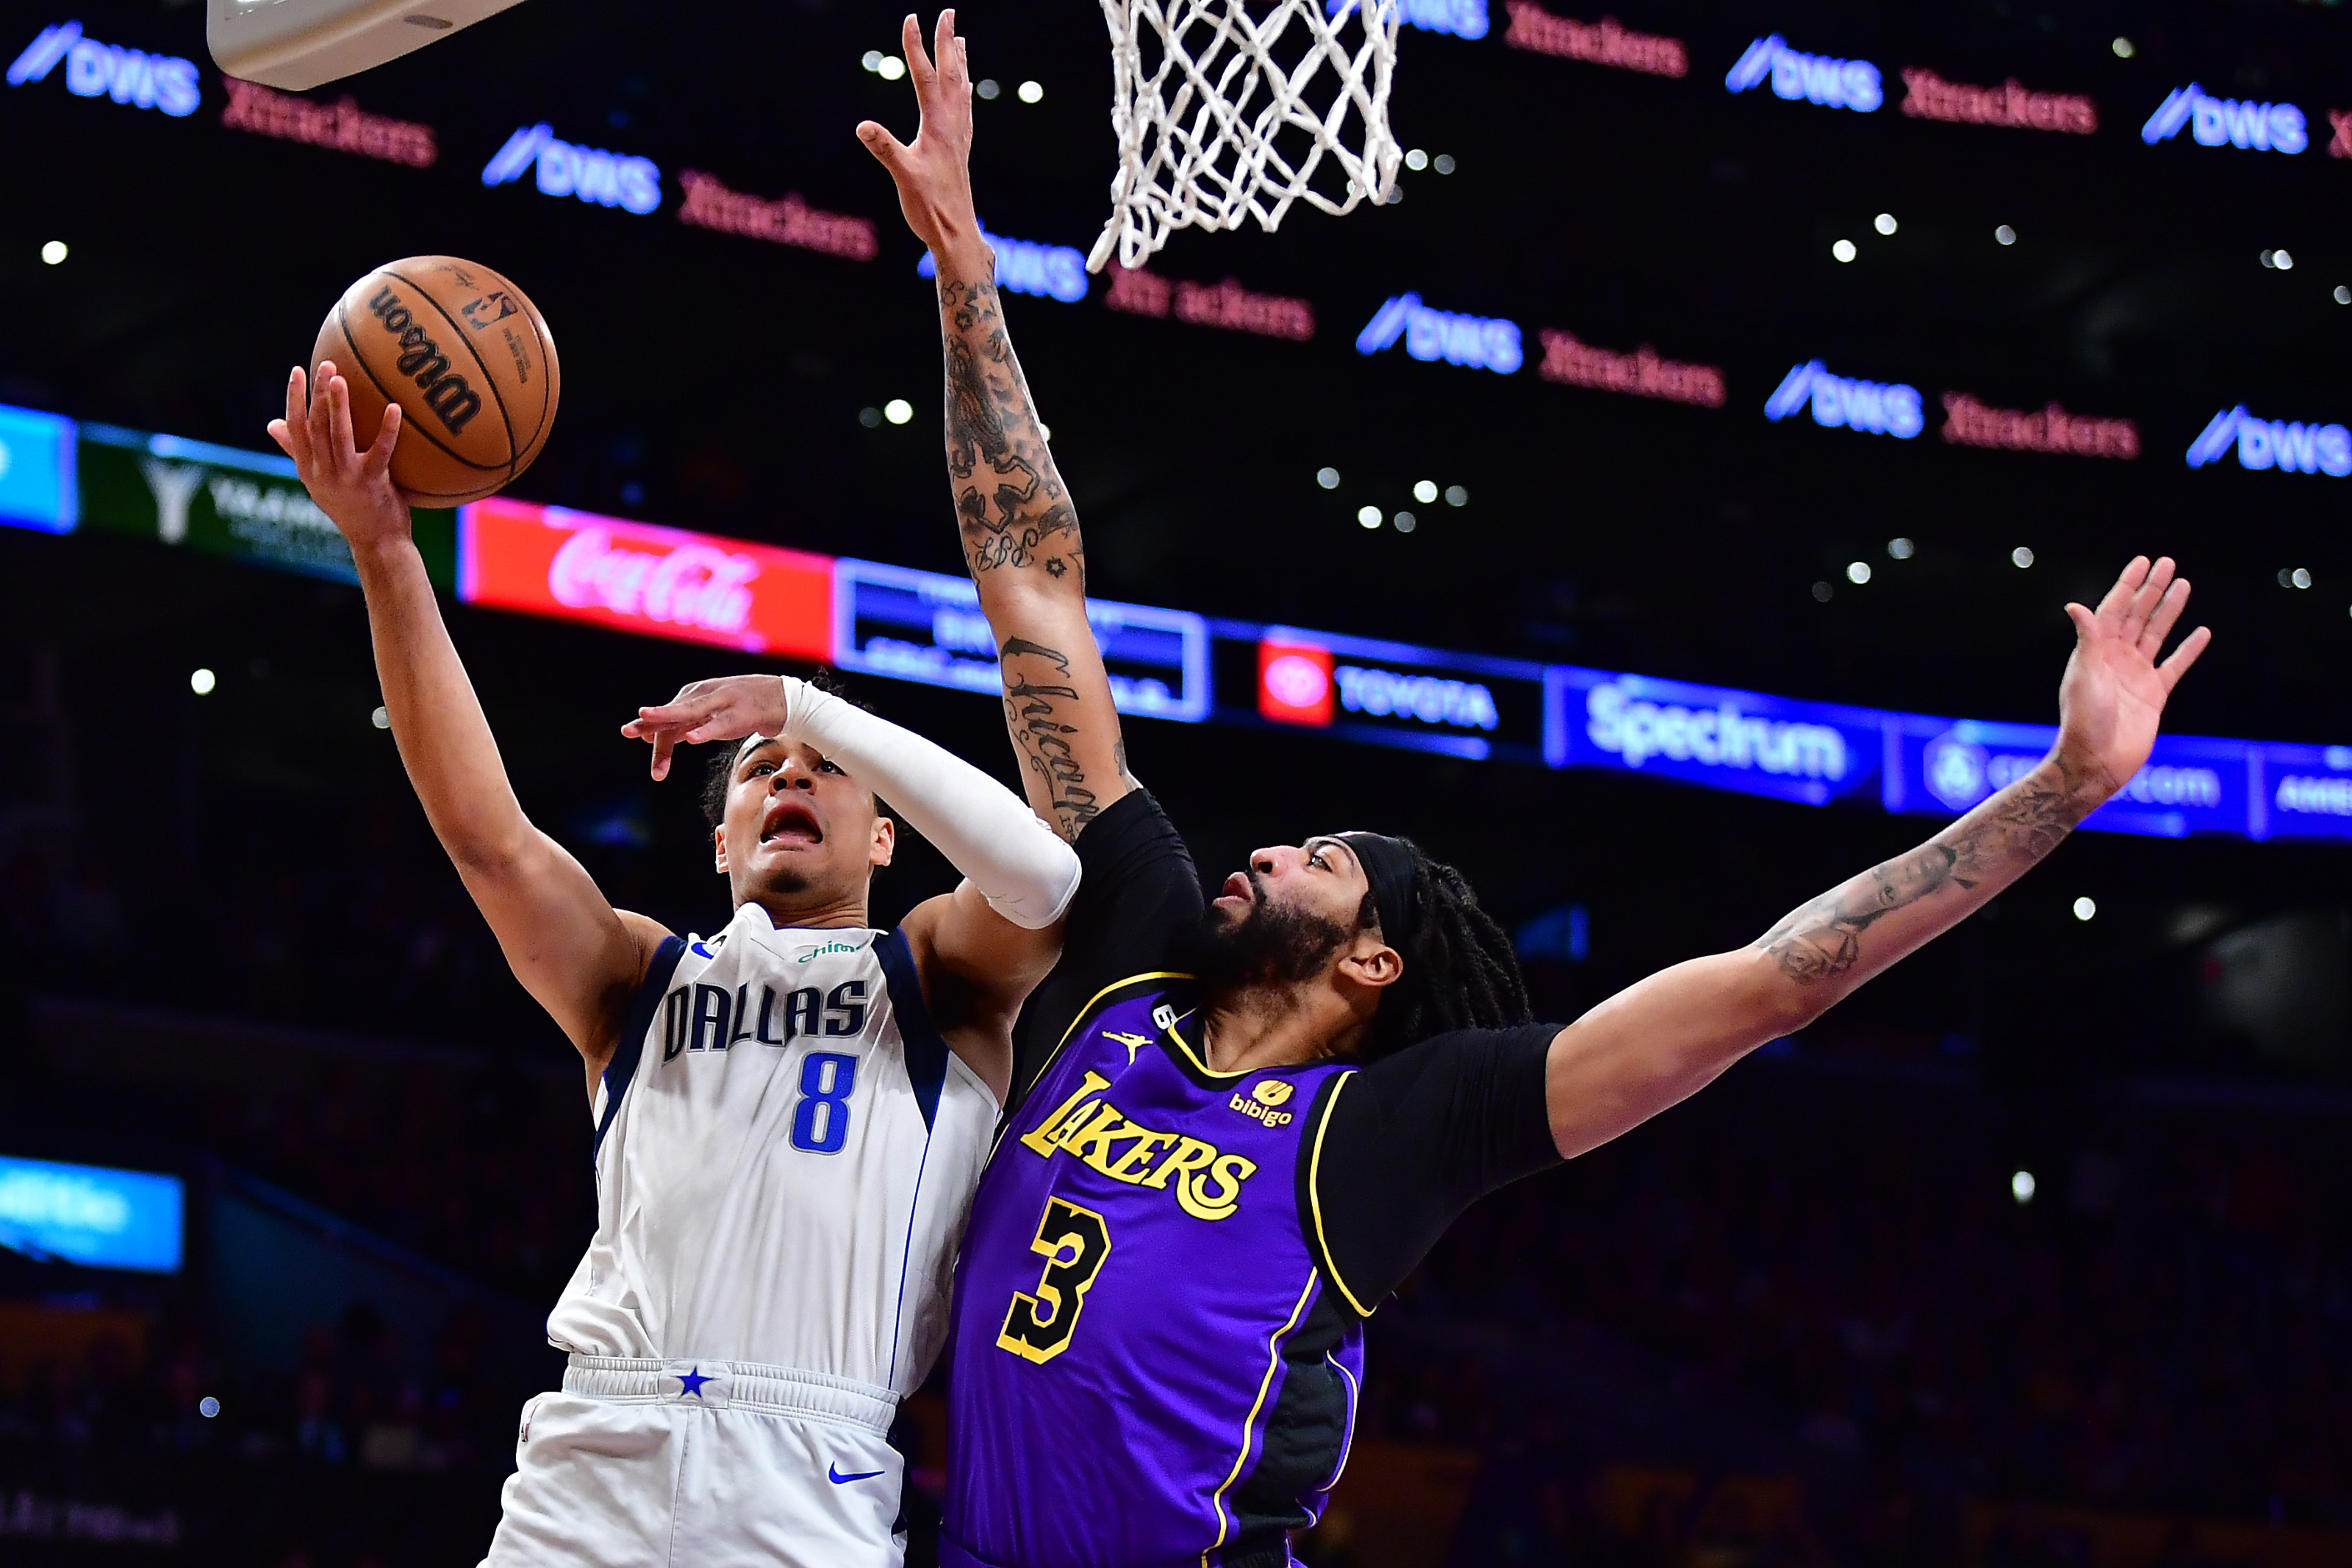 Lakers give away a lead in Christmas Day loss to Mavericks